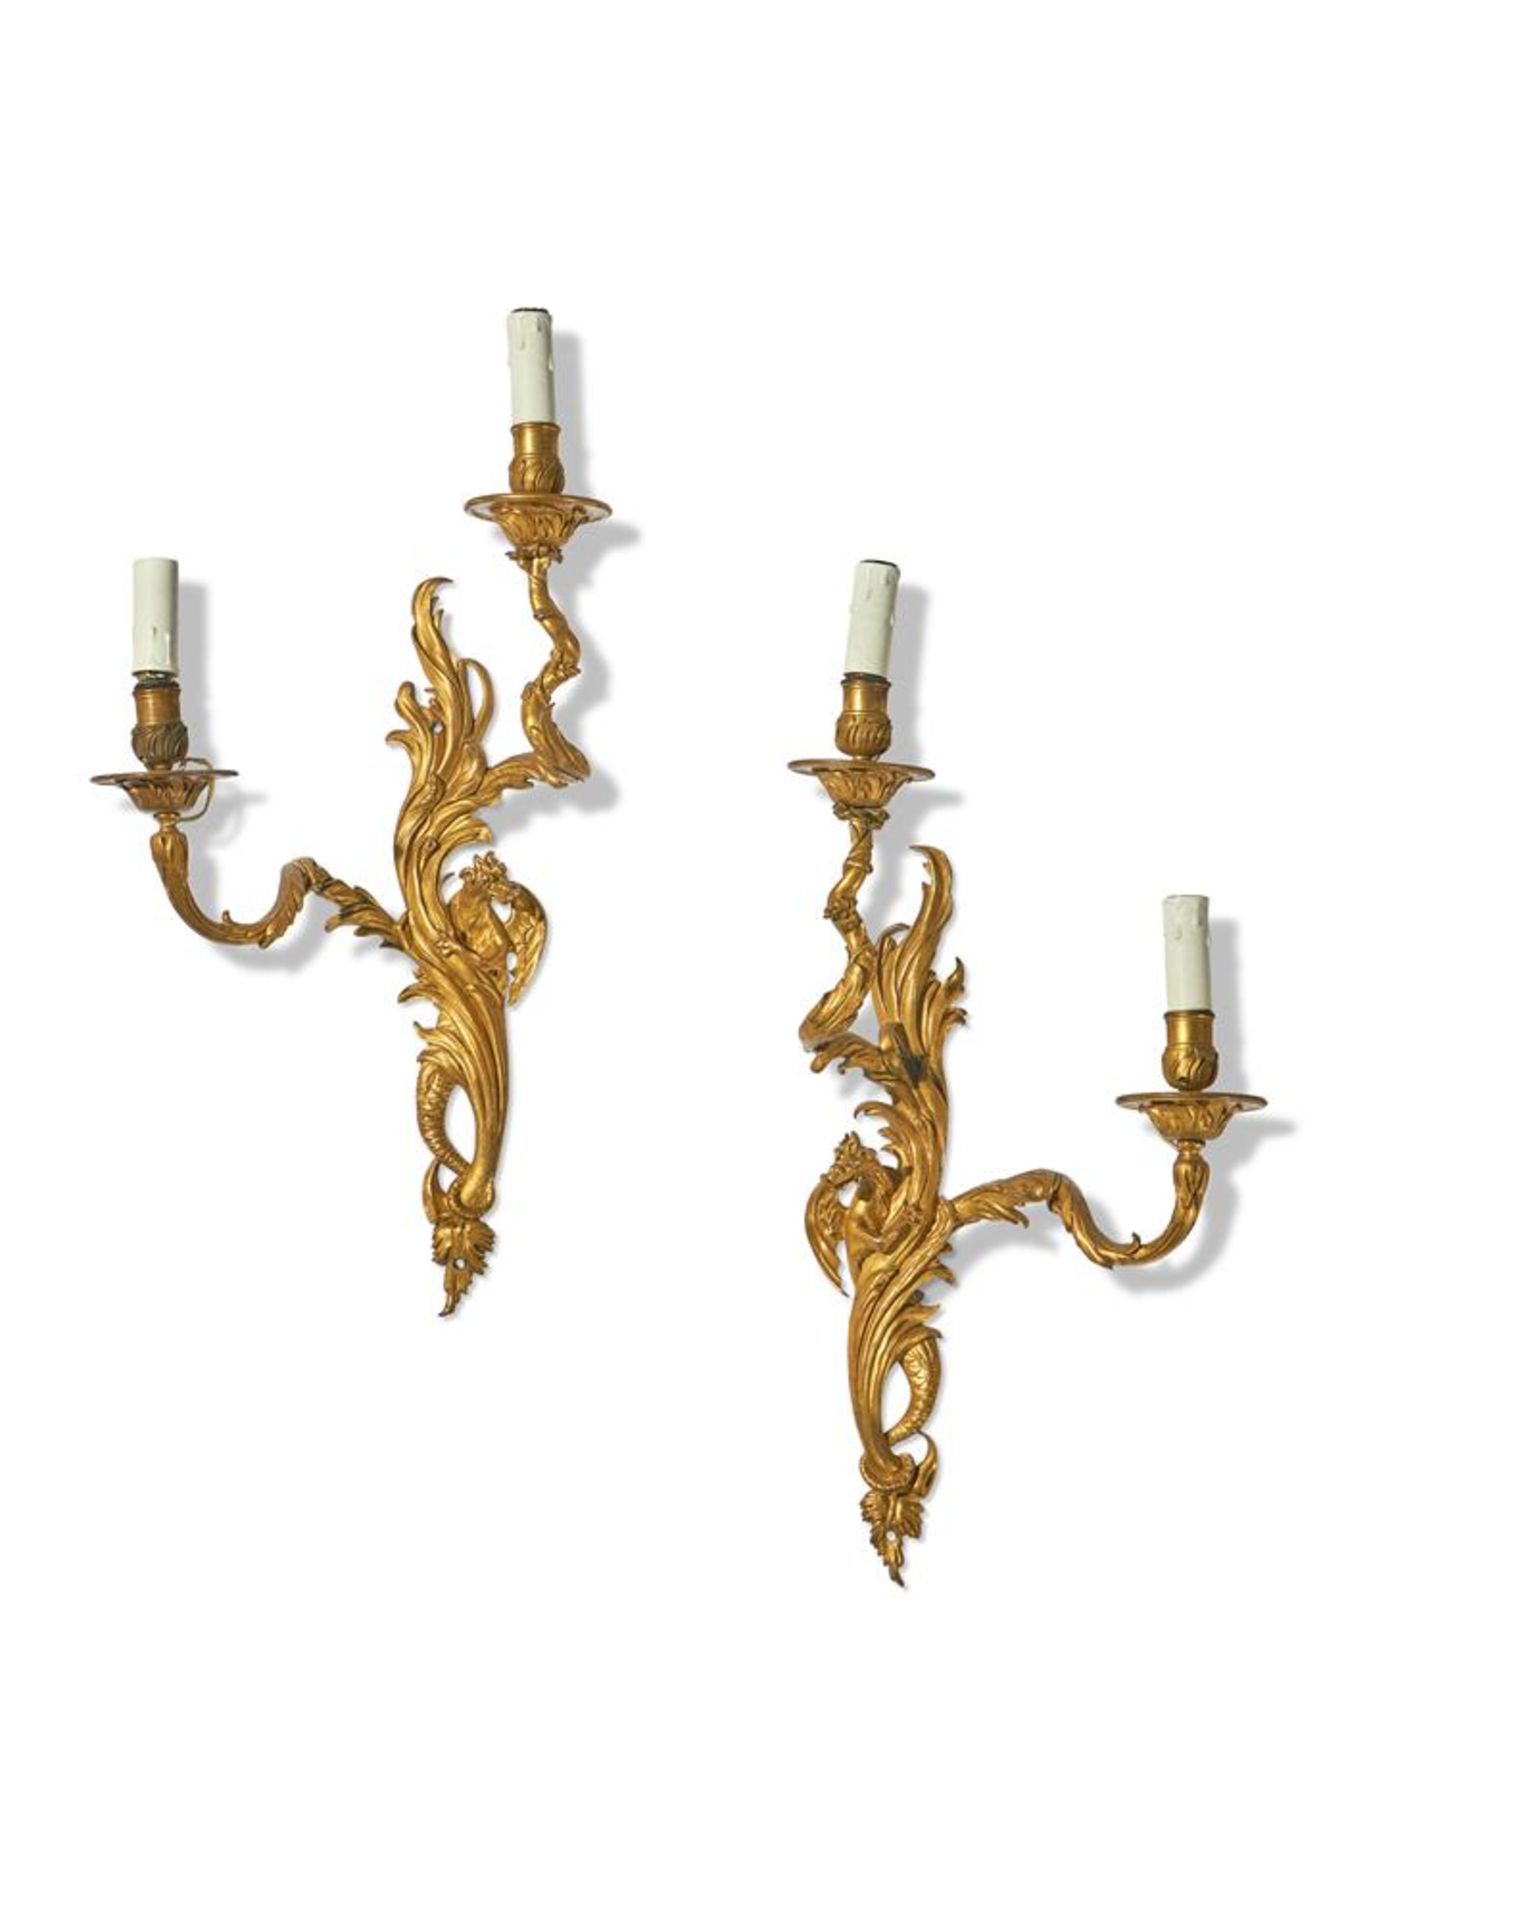 A PAIR OF ORMOLU TWIN BRANCH WALL LIGHTS, 18TH CENTURY - Image 2 of 5